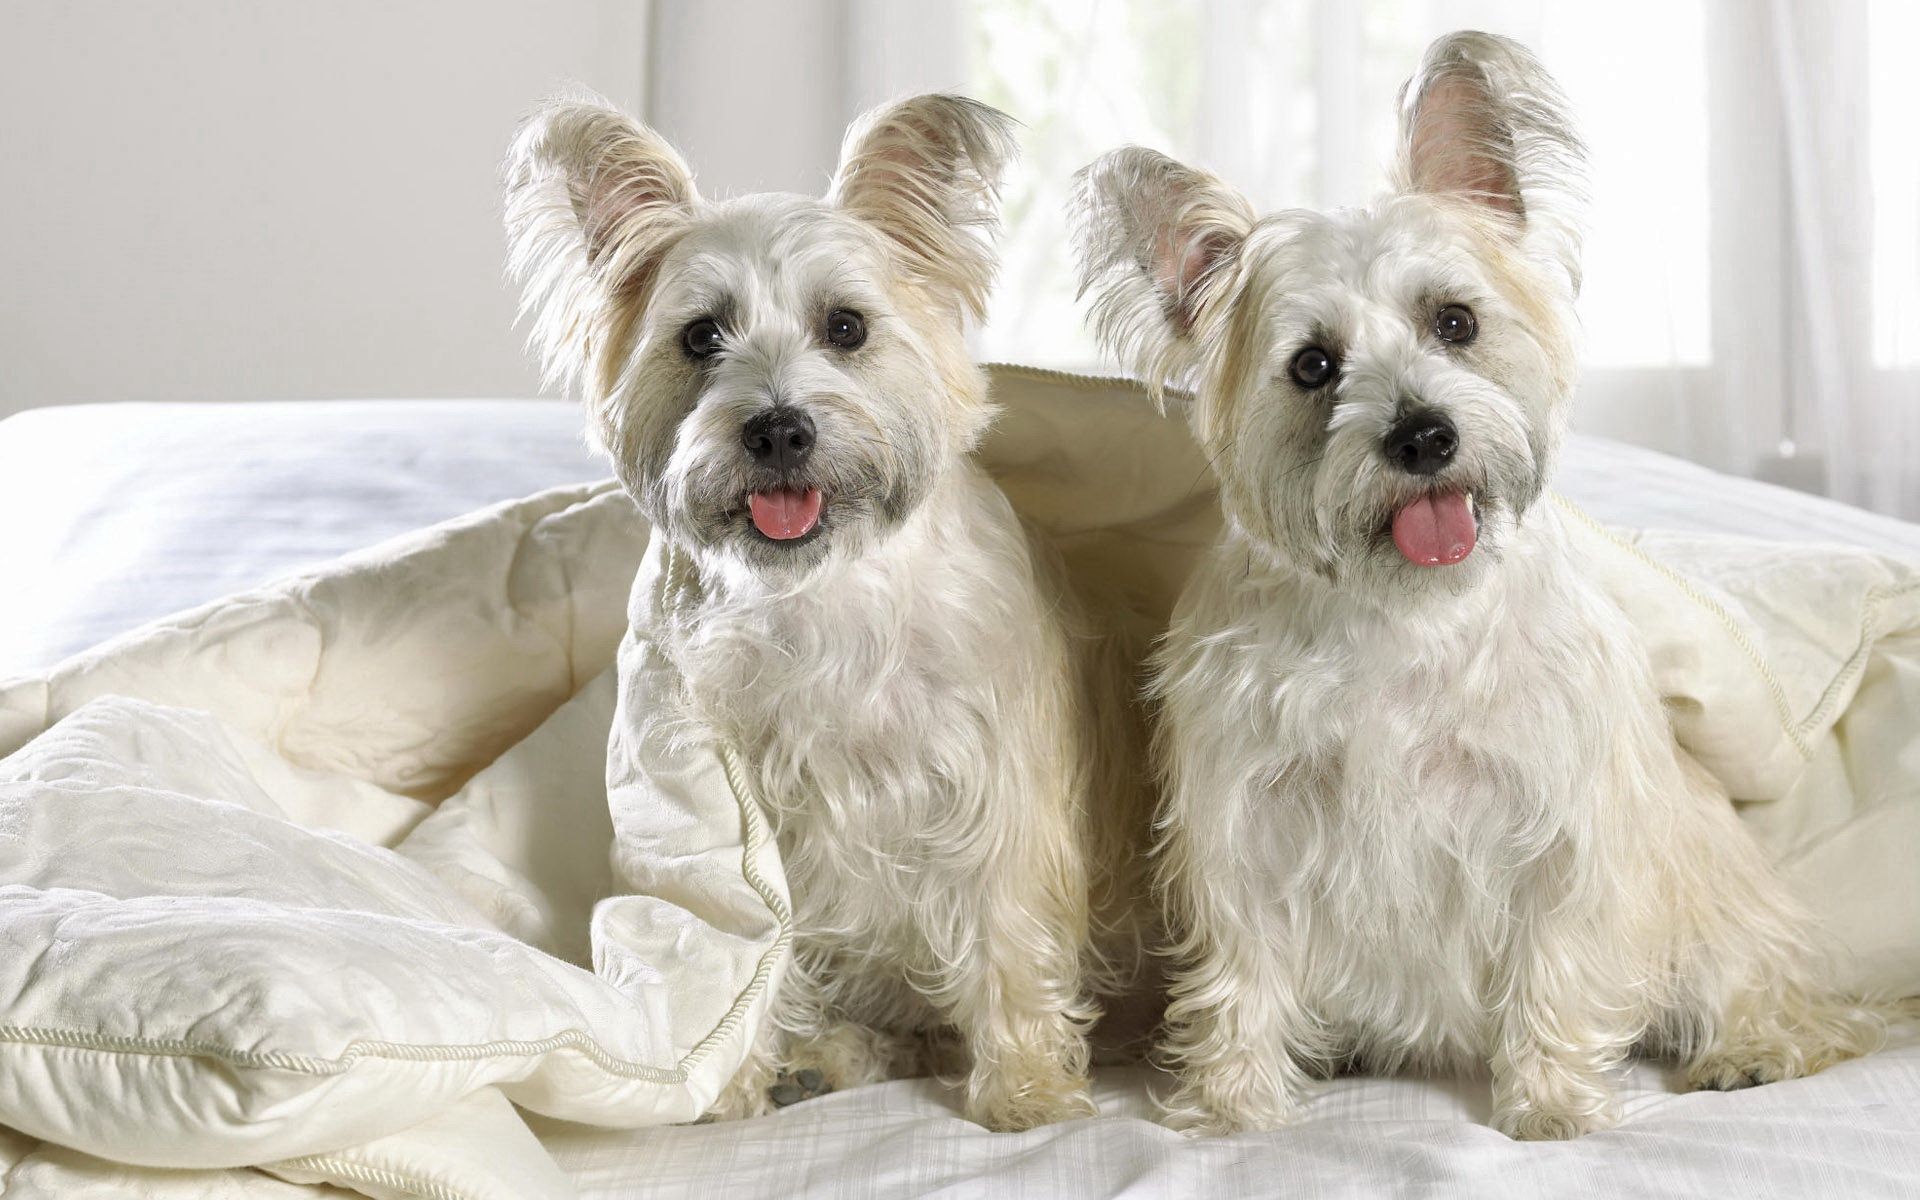 west highland terrier, animals, dogs, couple, pair, puppies, blanket